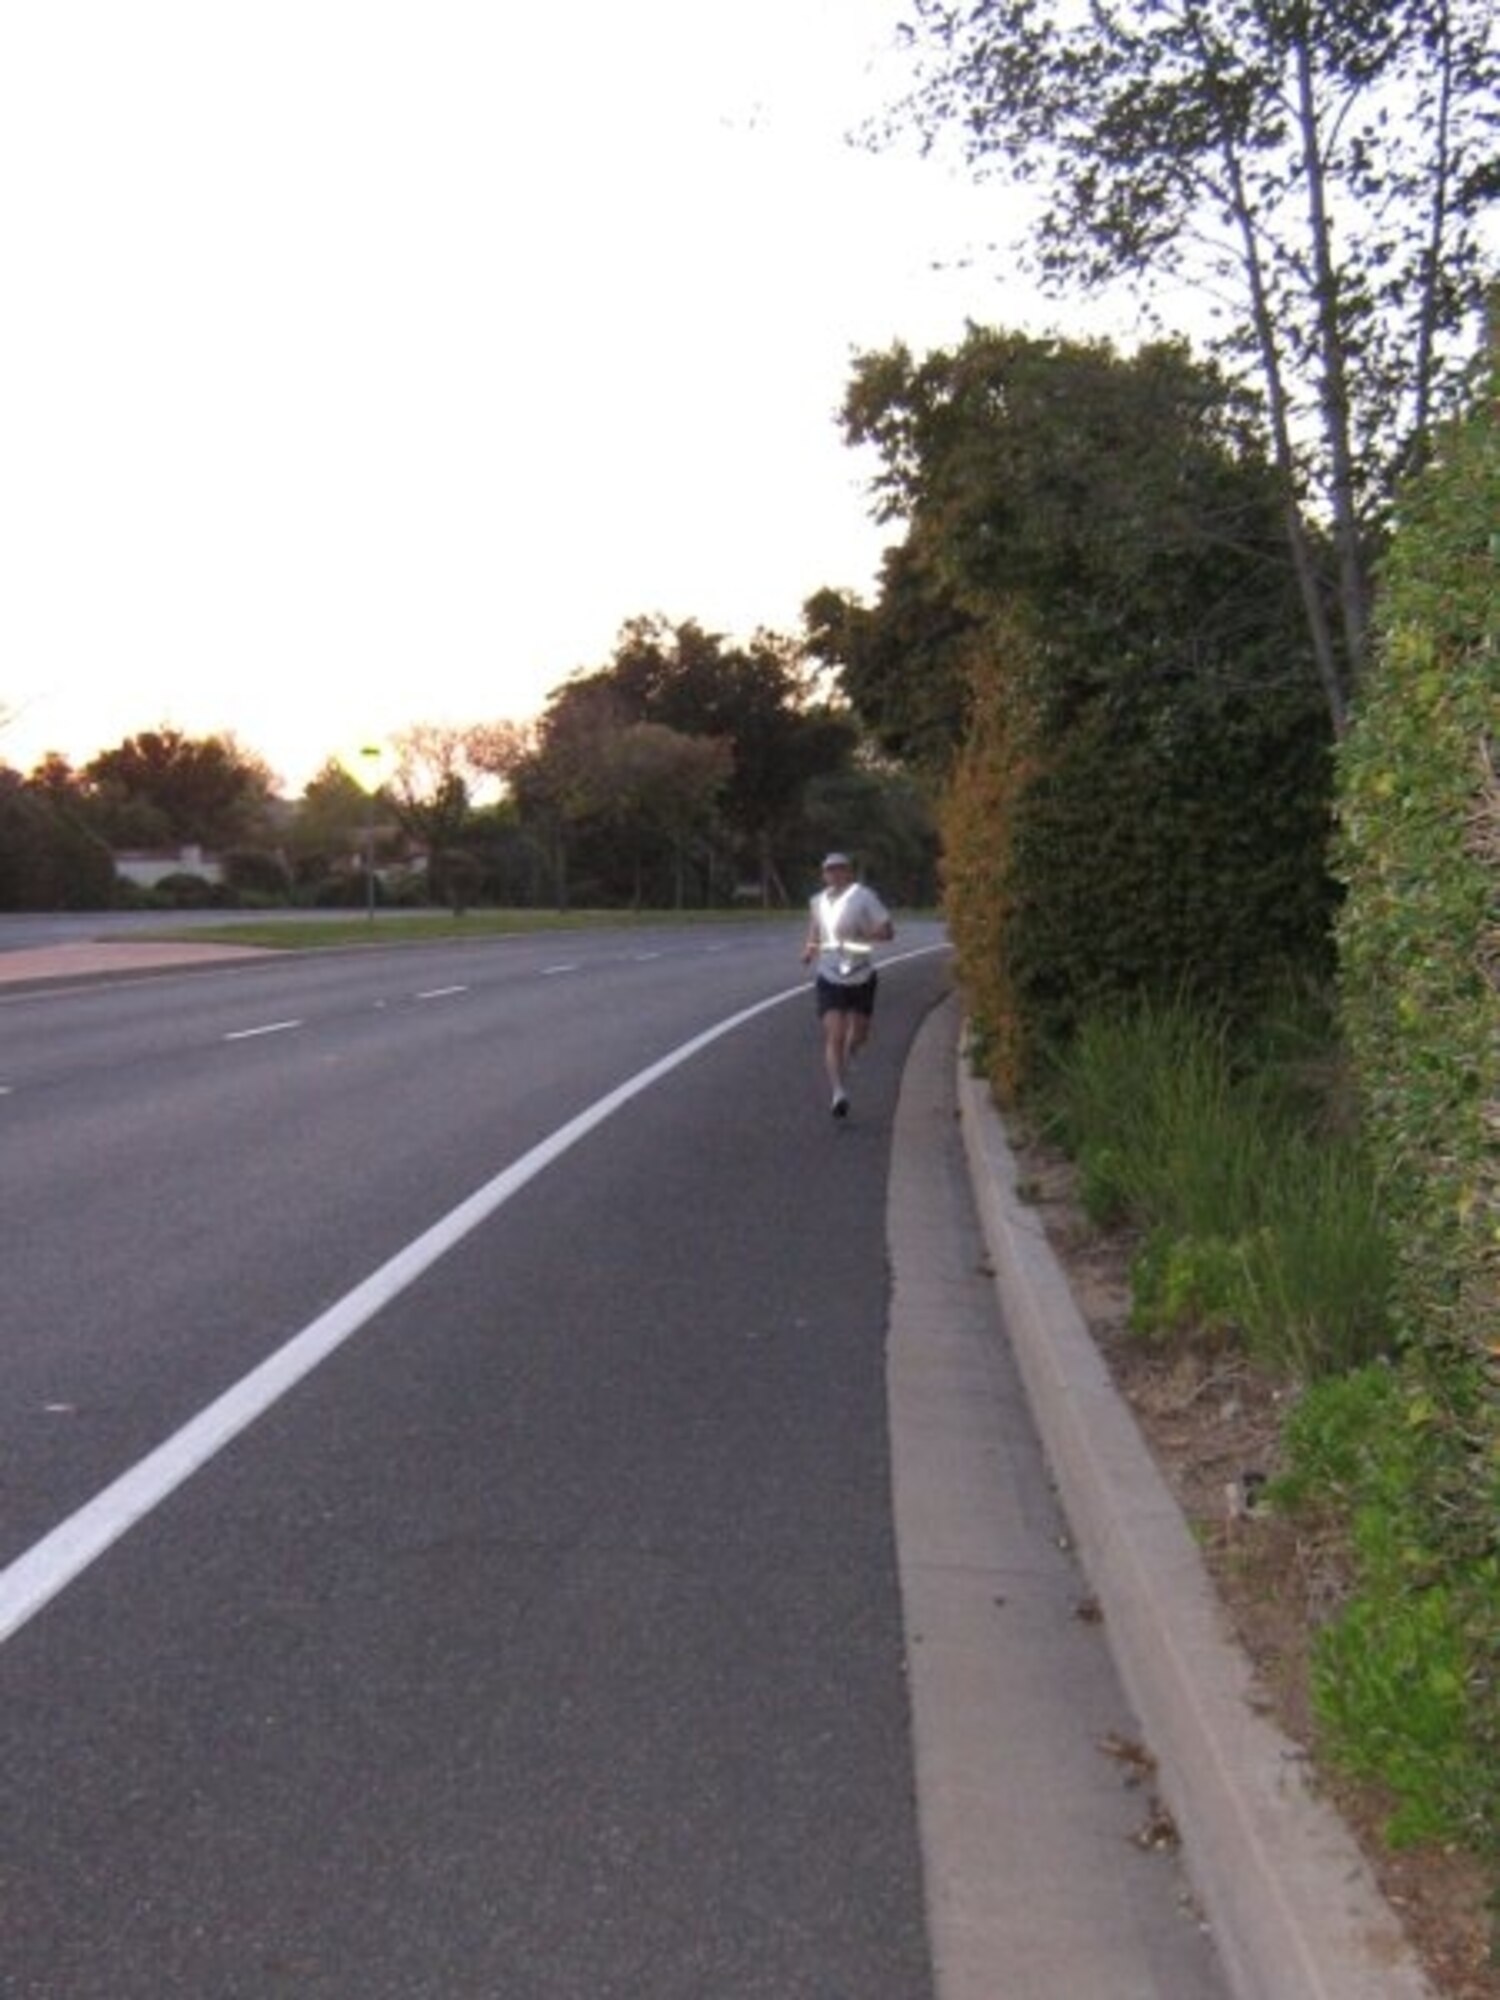 An unidentified runner runs alone on the back roads. Much of the time, runners were all alone on the roads during the 200 mile run from Ventura to Dana Point. (Photo courtsey of GPSW)